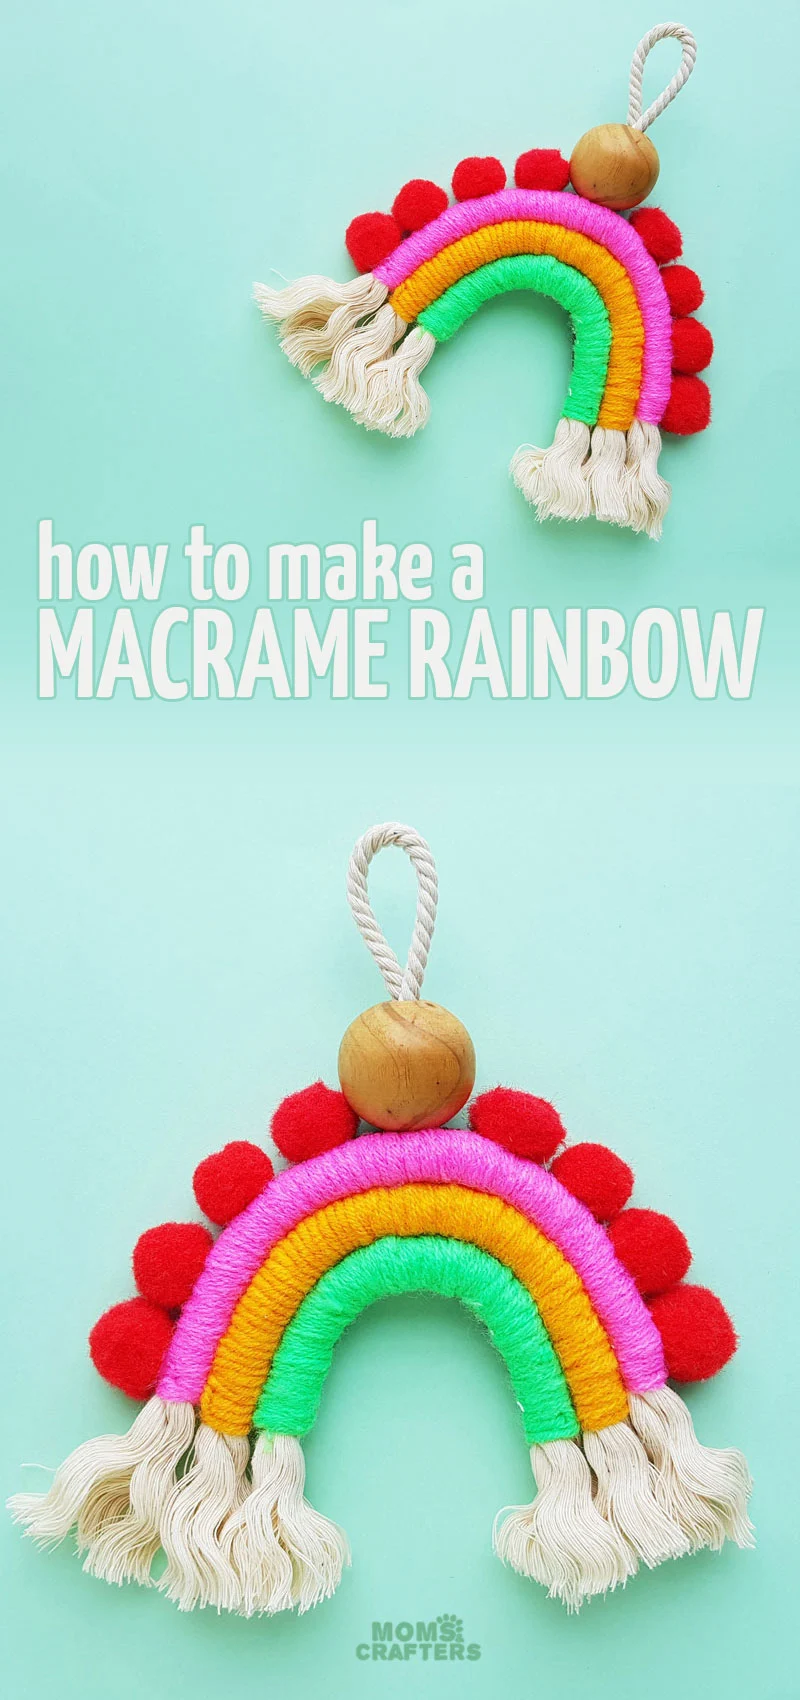 LEarn how to make a macrame rainbow wall hanging or charm for your home! This adorable DIY home decor craft for teens and tweens is also a great nursery or playroom decor idea!